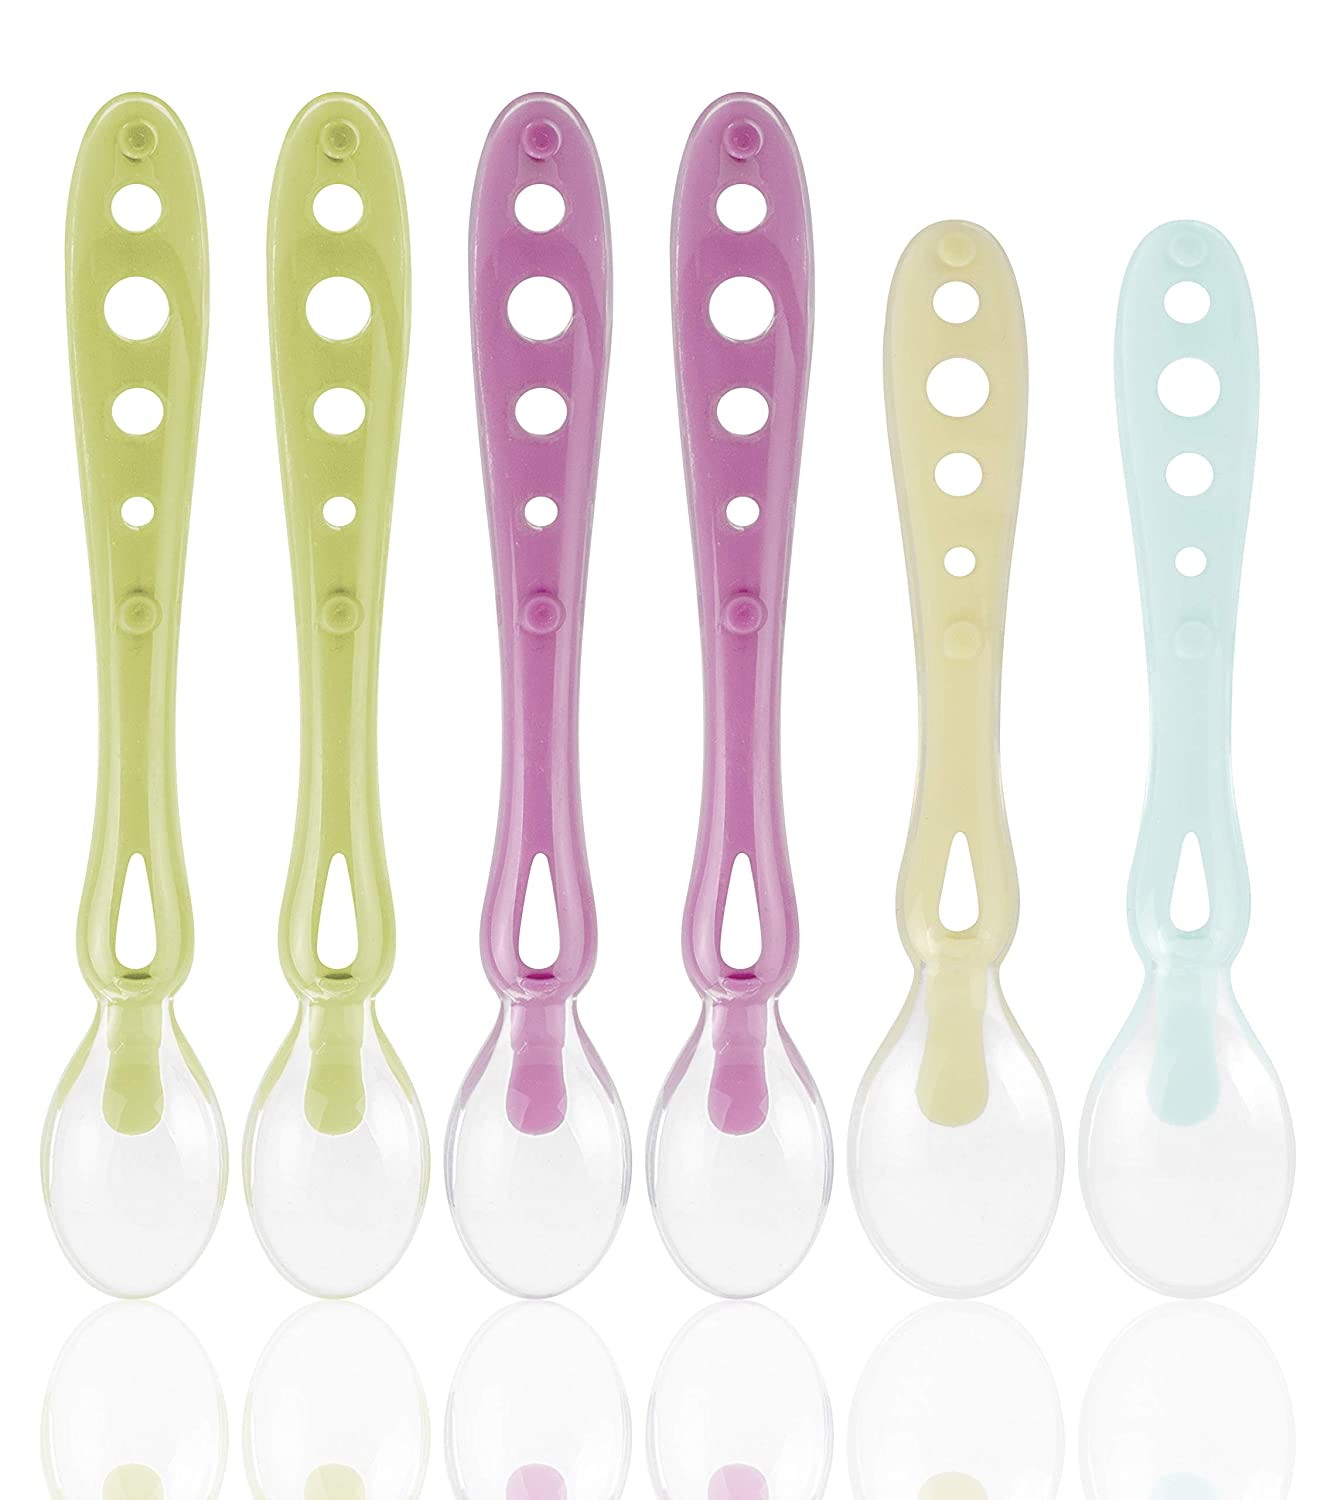 Top 9 Best Baby Spoons for Self Feeding Reviews in 2022 7